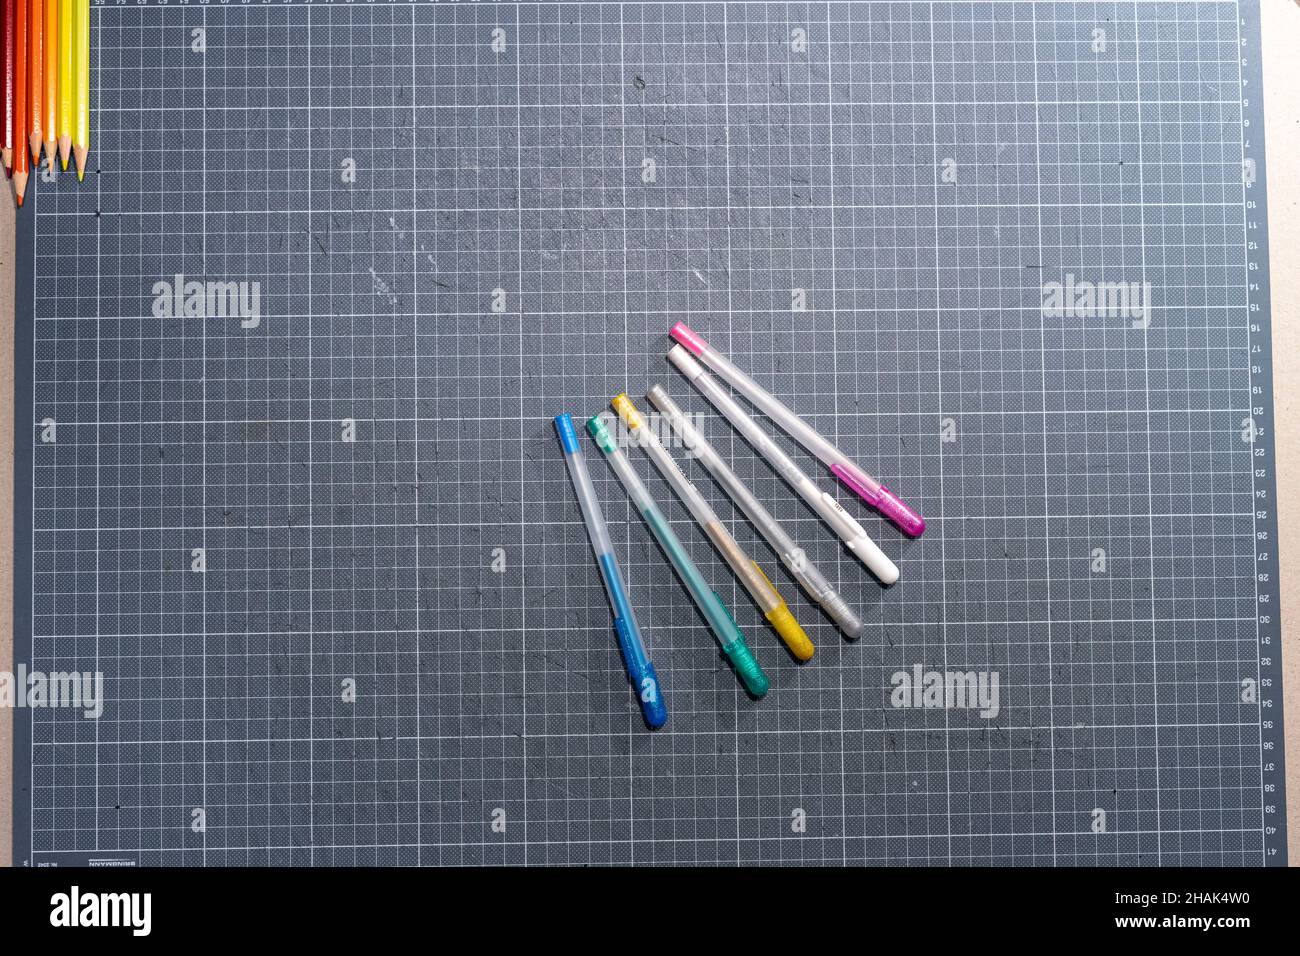 Colorful pens and pencils ready for some coloring Stock Photo